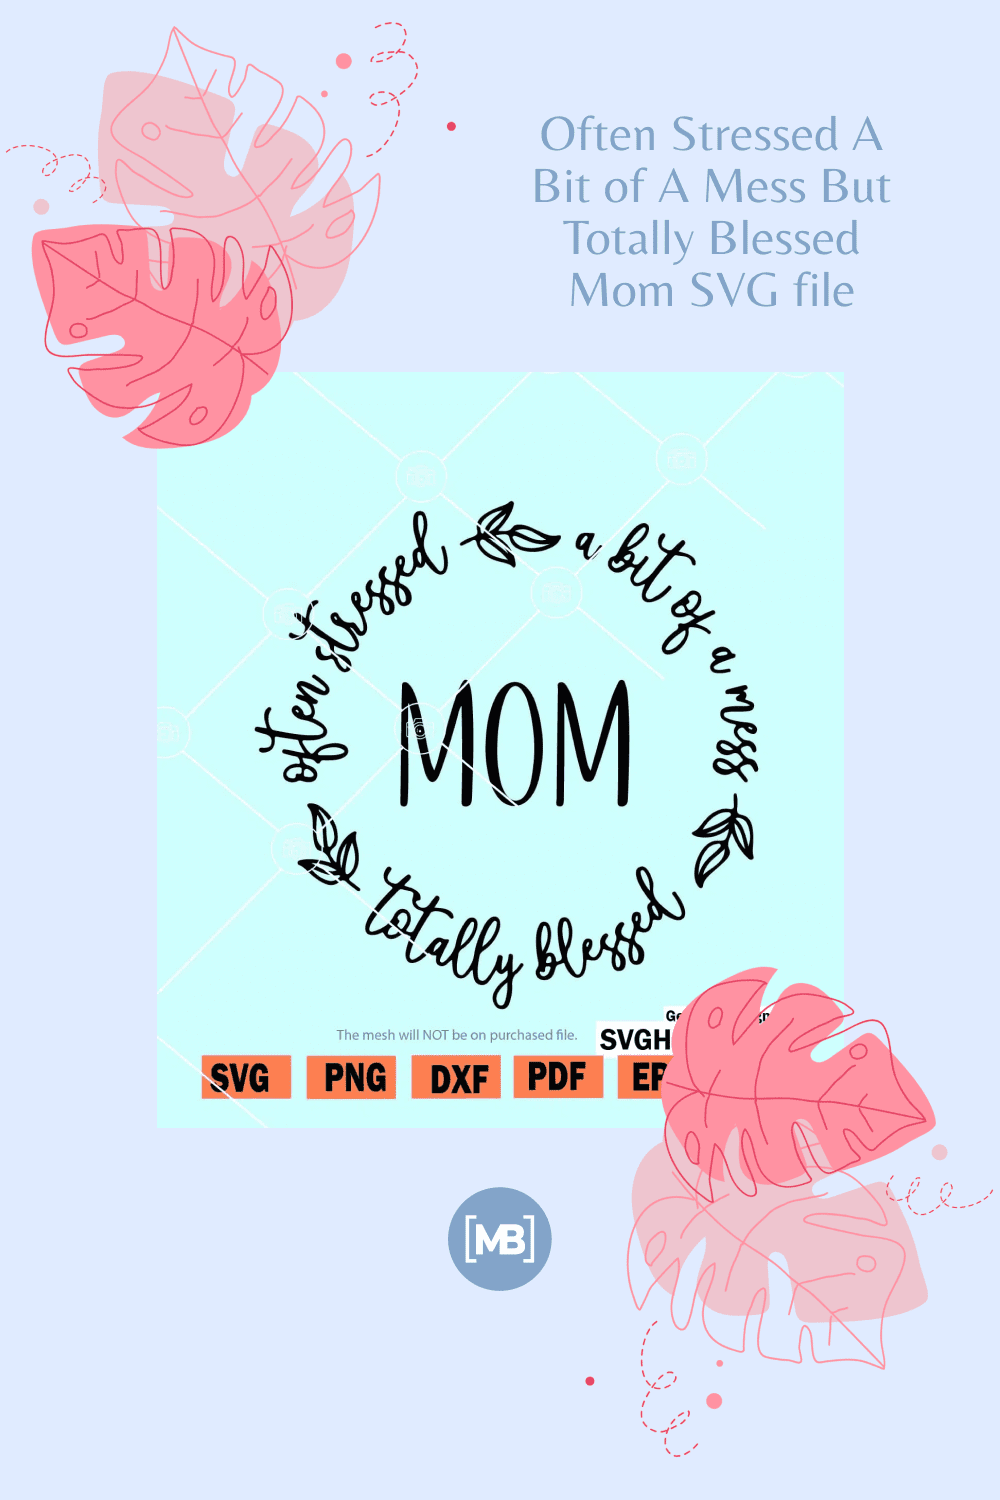 Often Stressed A Bit of A Mess But Totally Blessed Mom SVG file.